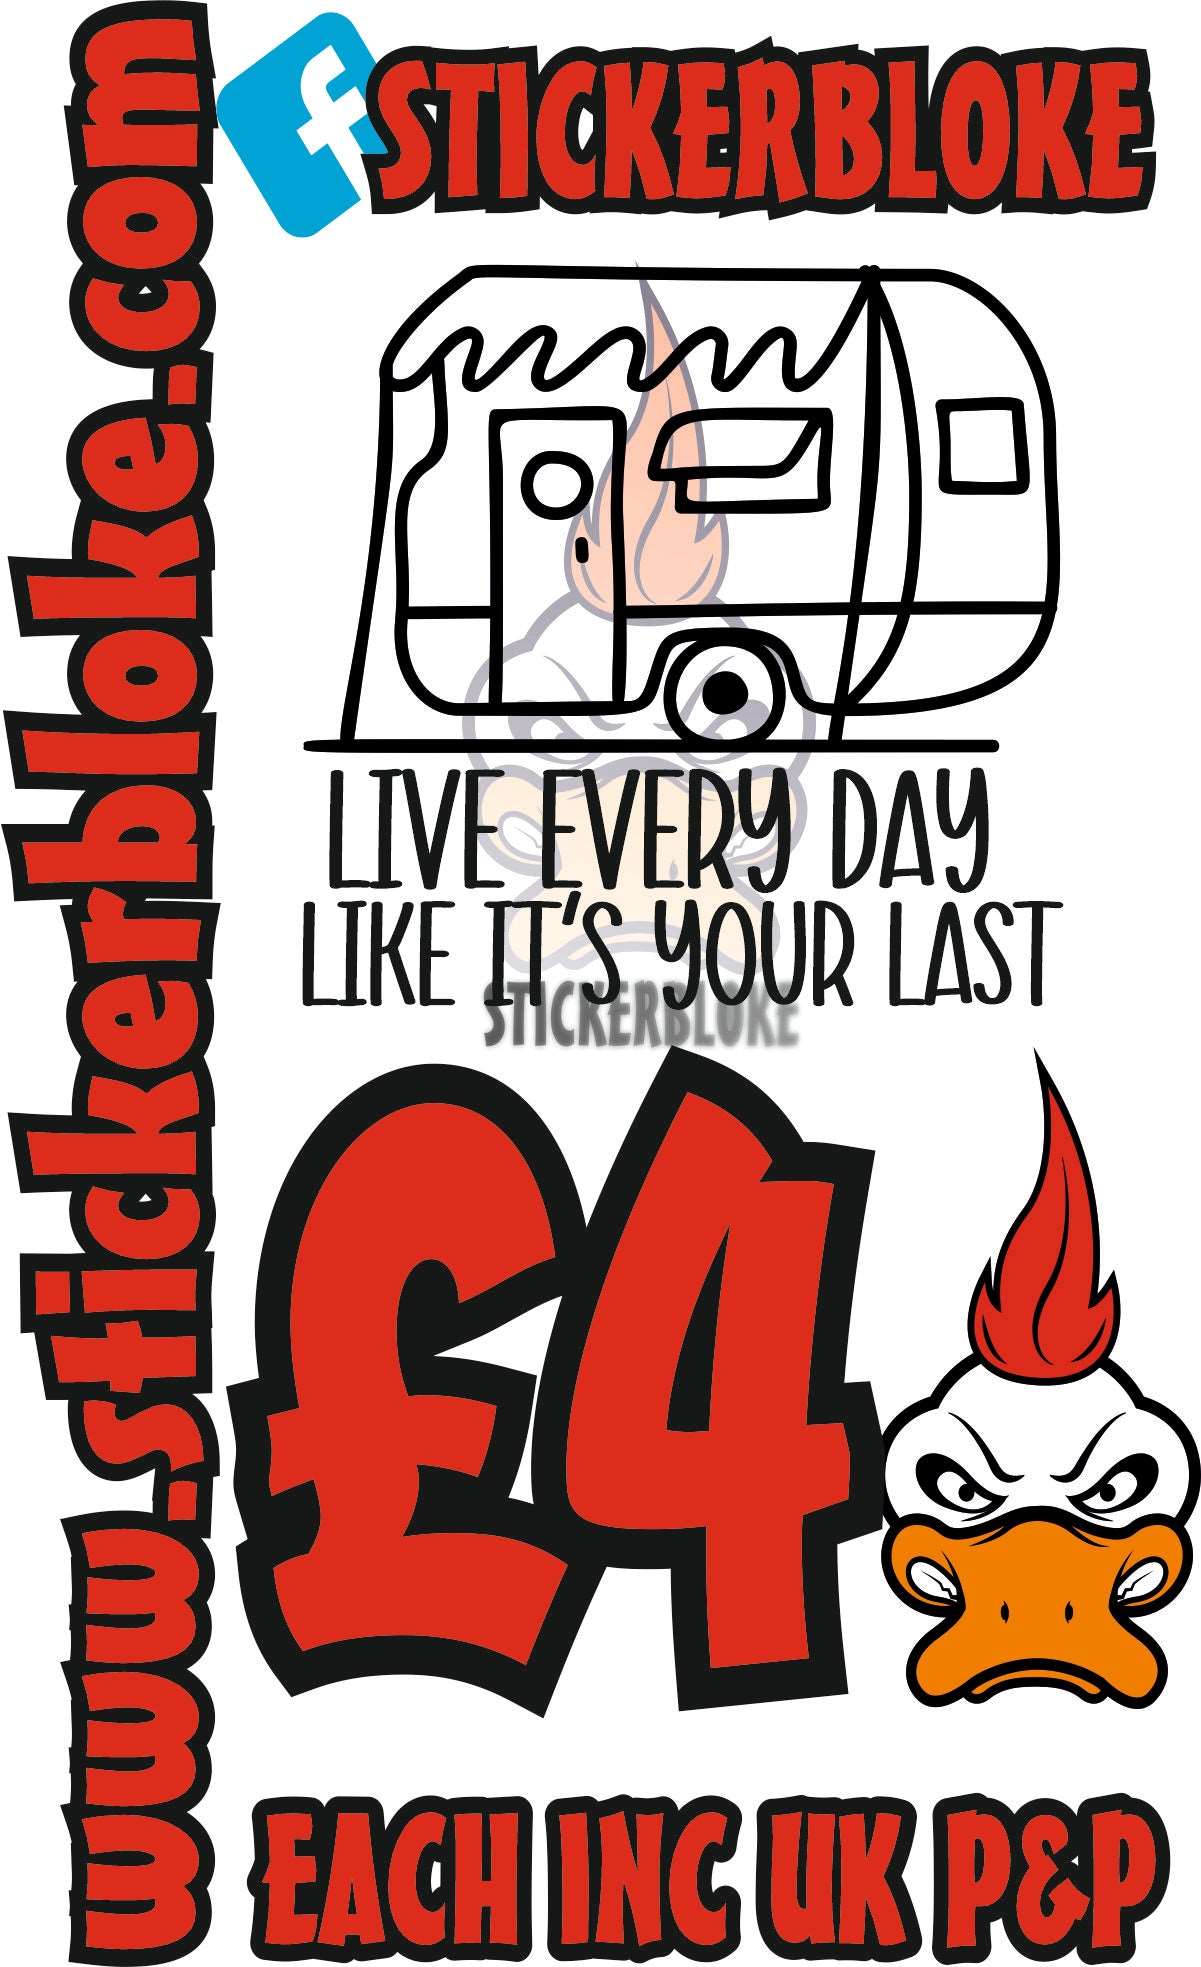 LIVE EVERYDAY LIKE ITS YOUR LAST - STICKERBLOKE